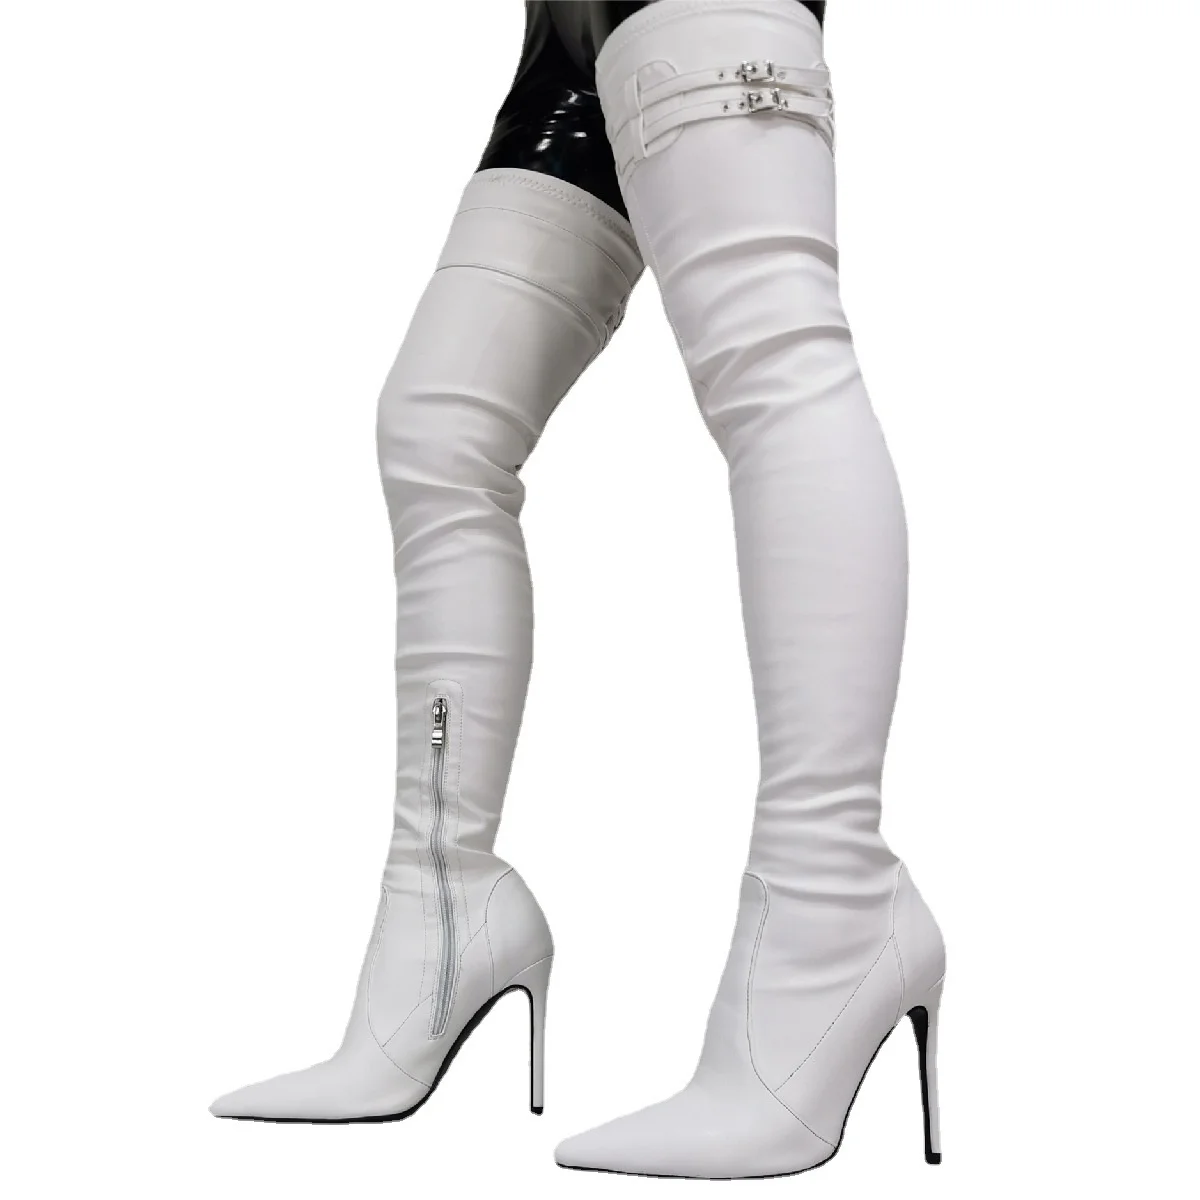 

Heel Thin Over The Knee Zipper Sexy Shoes Women High Heels Whiter Elastic Boots Buckle Botas Mujer Big Size 47 Thigh Boot